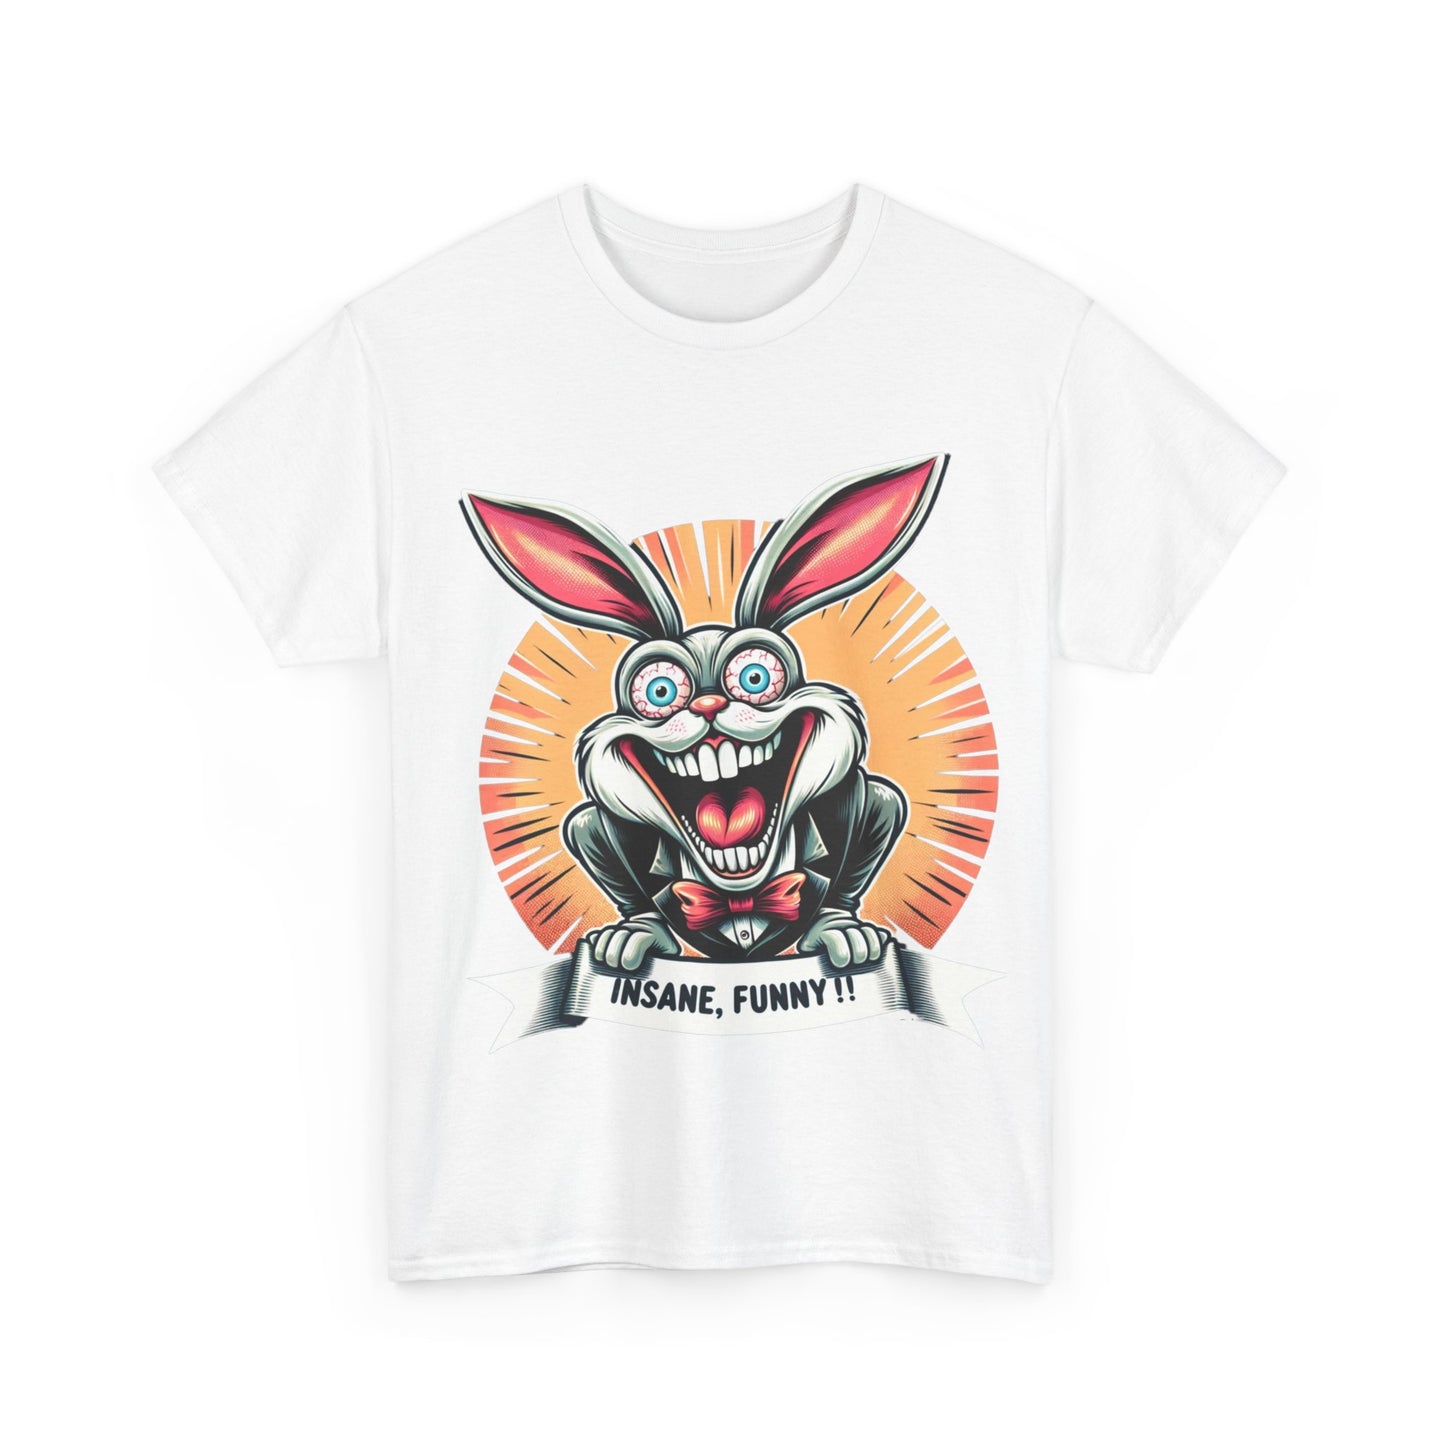 "Insane Funny" Hilarious Bunny Tee – Unleash Creativity & Humor in Your Style!